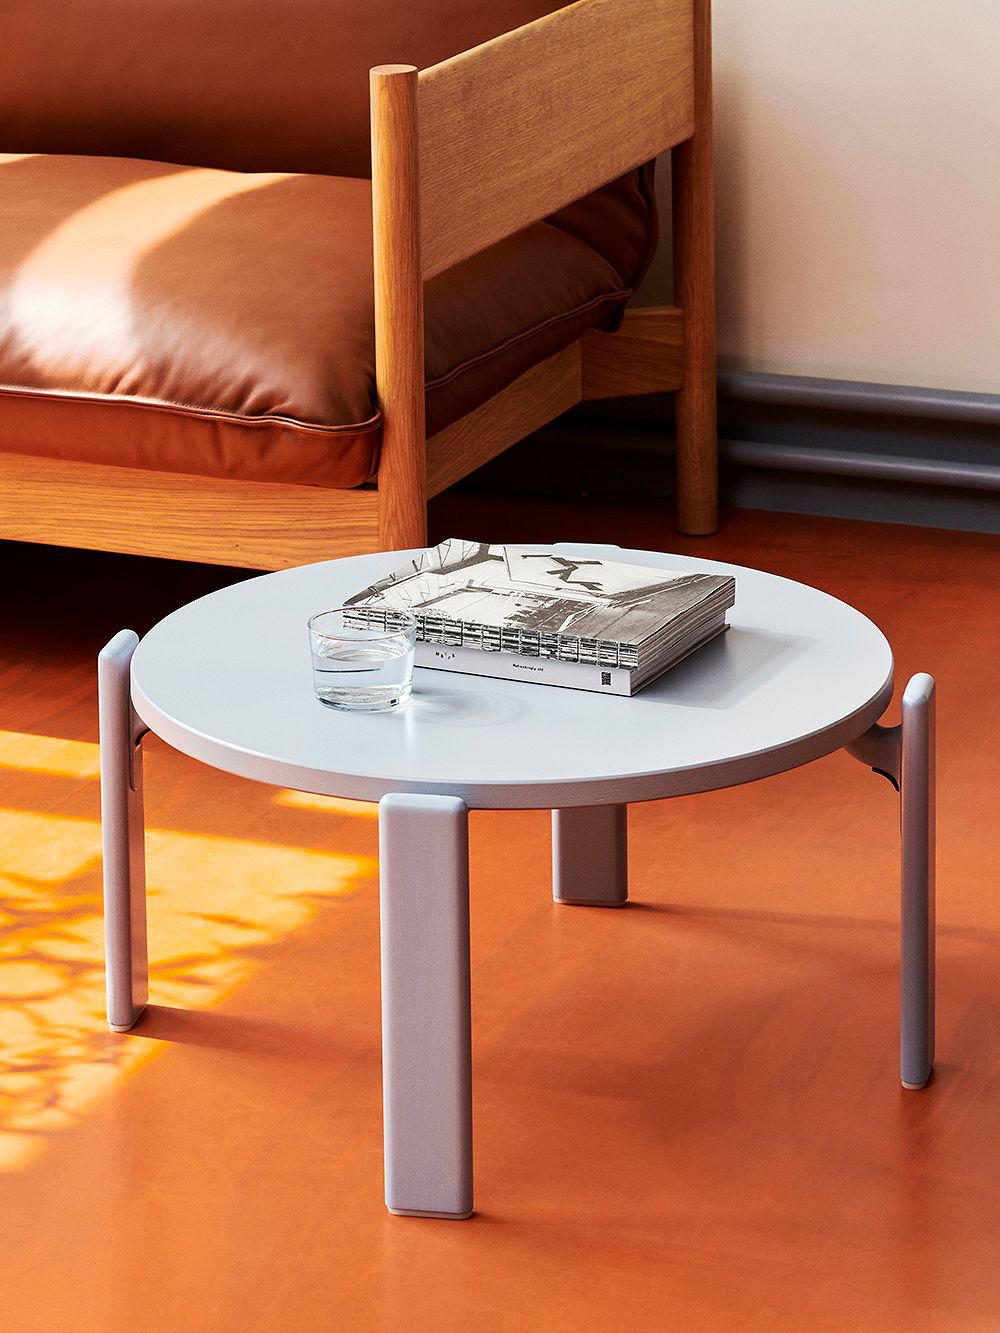 An image of HAY's Rey coffee table in a light blue color, as part of the living room decor.